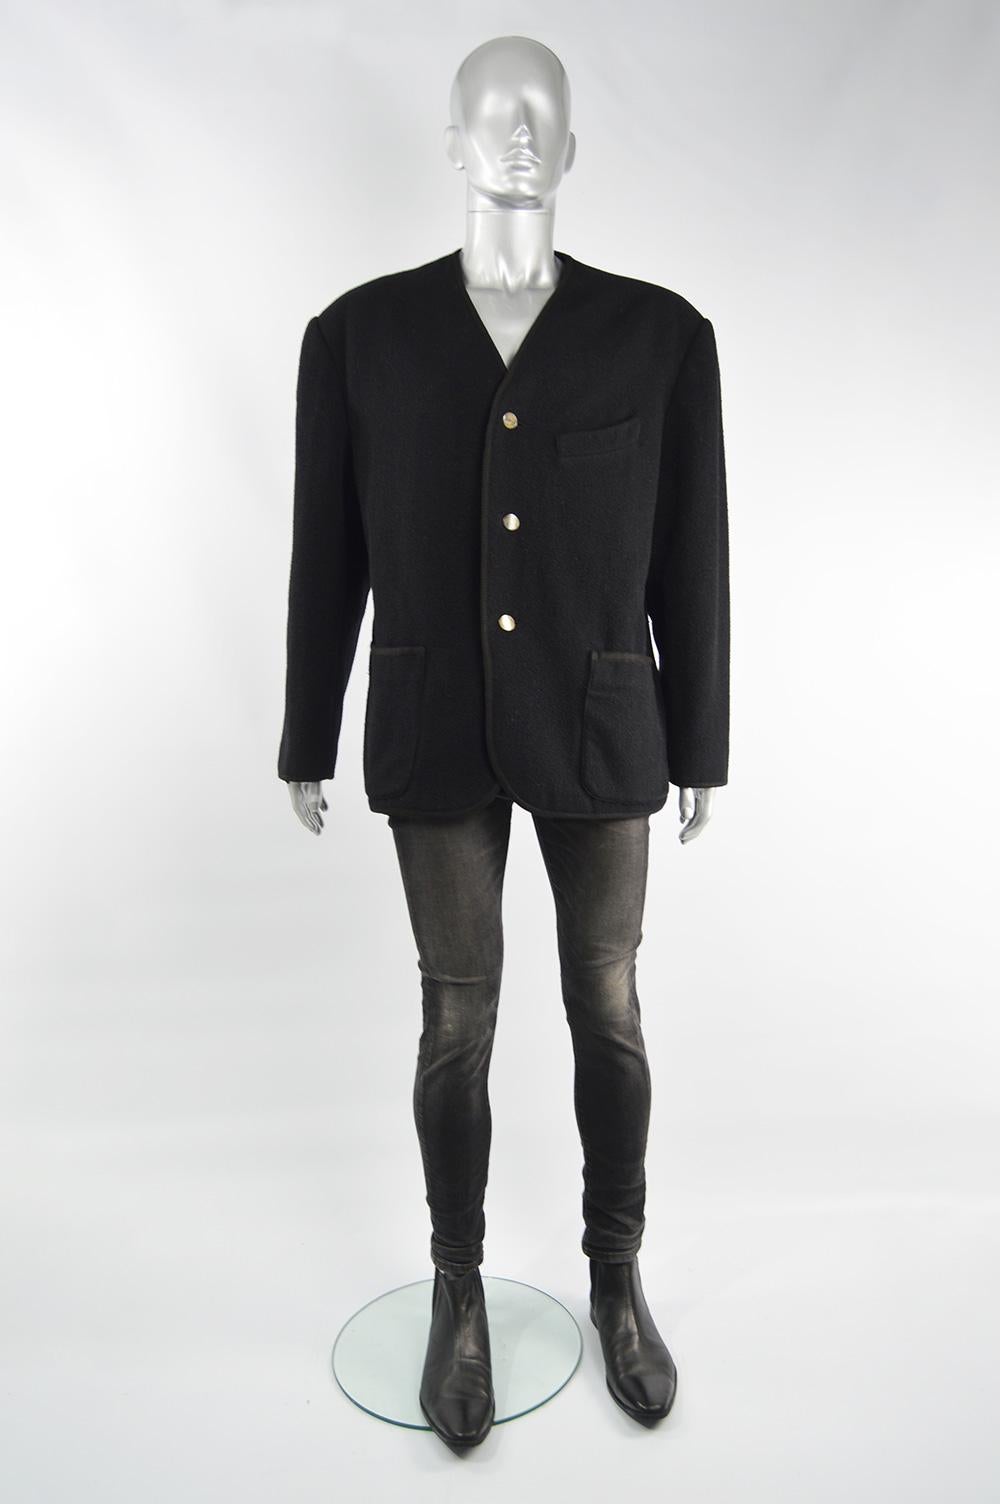 A bold vintage men's Jean Paul Gaultier blazer jacket from the 80s in a black wool with a braided trim, collarless design and shoulder pads giving an edgy silhouette. 

Size: Marked L but this gives an intended slightly loose fit so would also suit